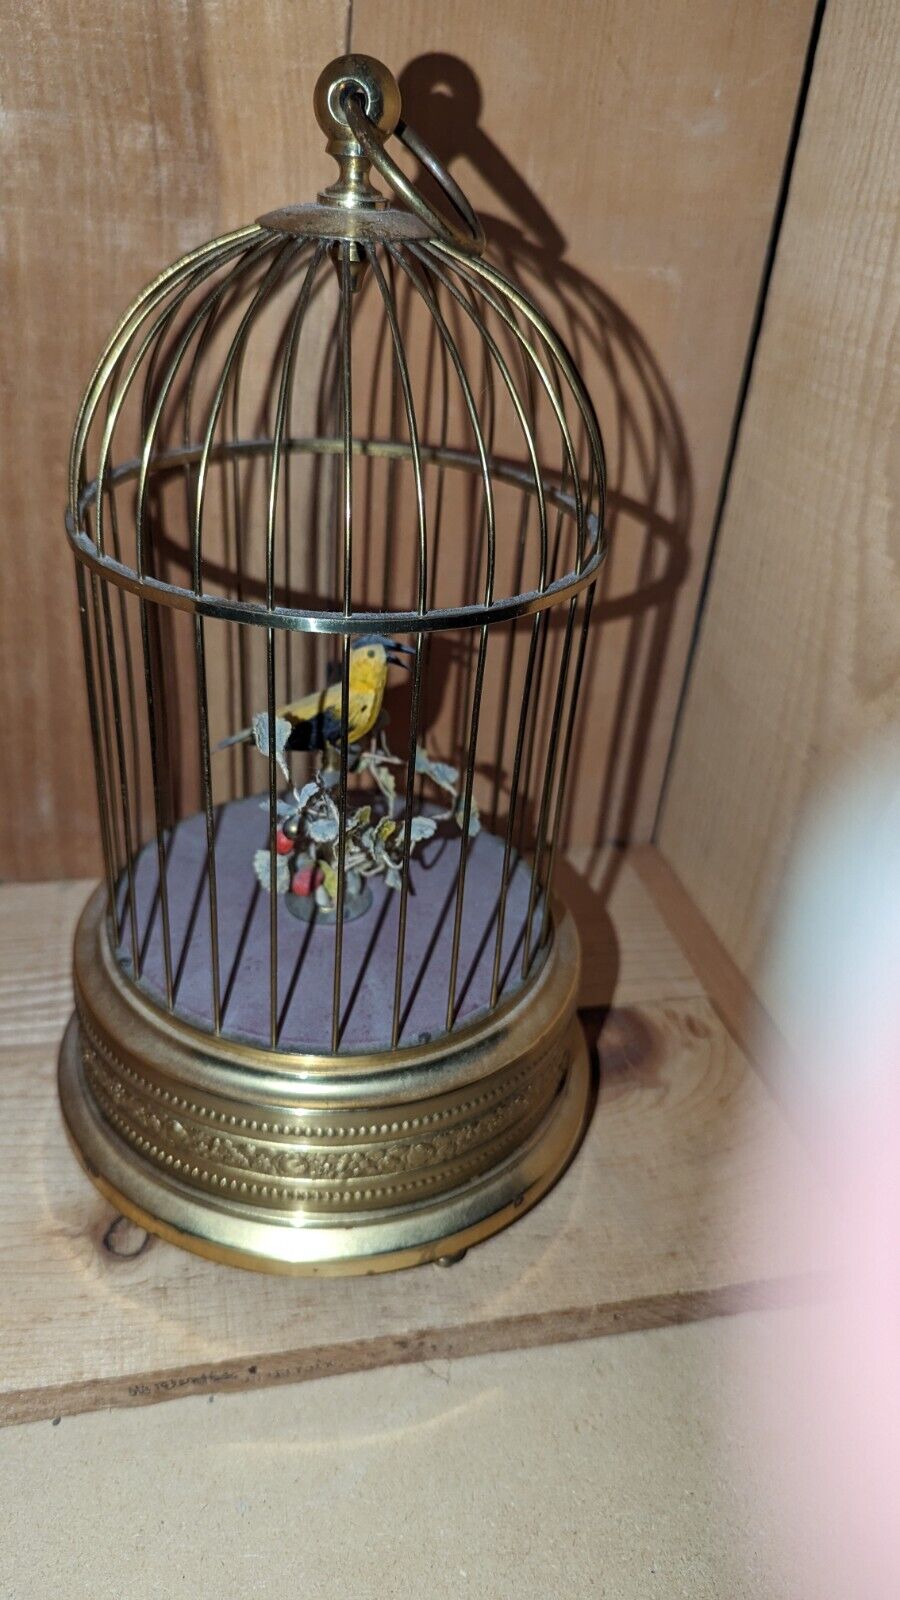 German or French Singing Automaton Bird in Brass Cage. Bontems Griesbaum? 